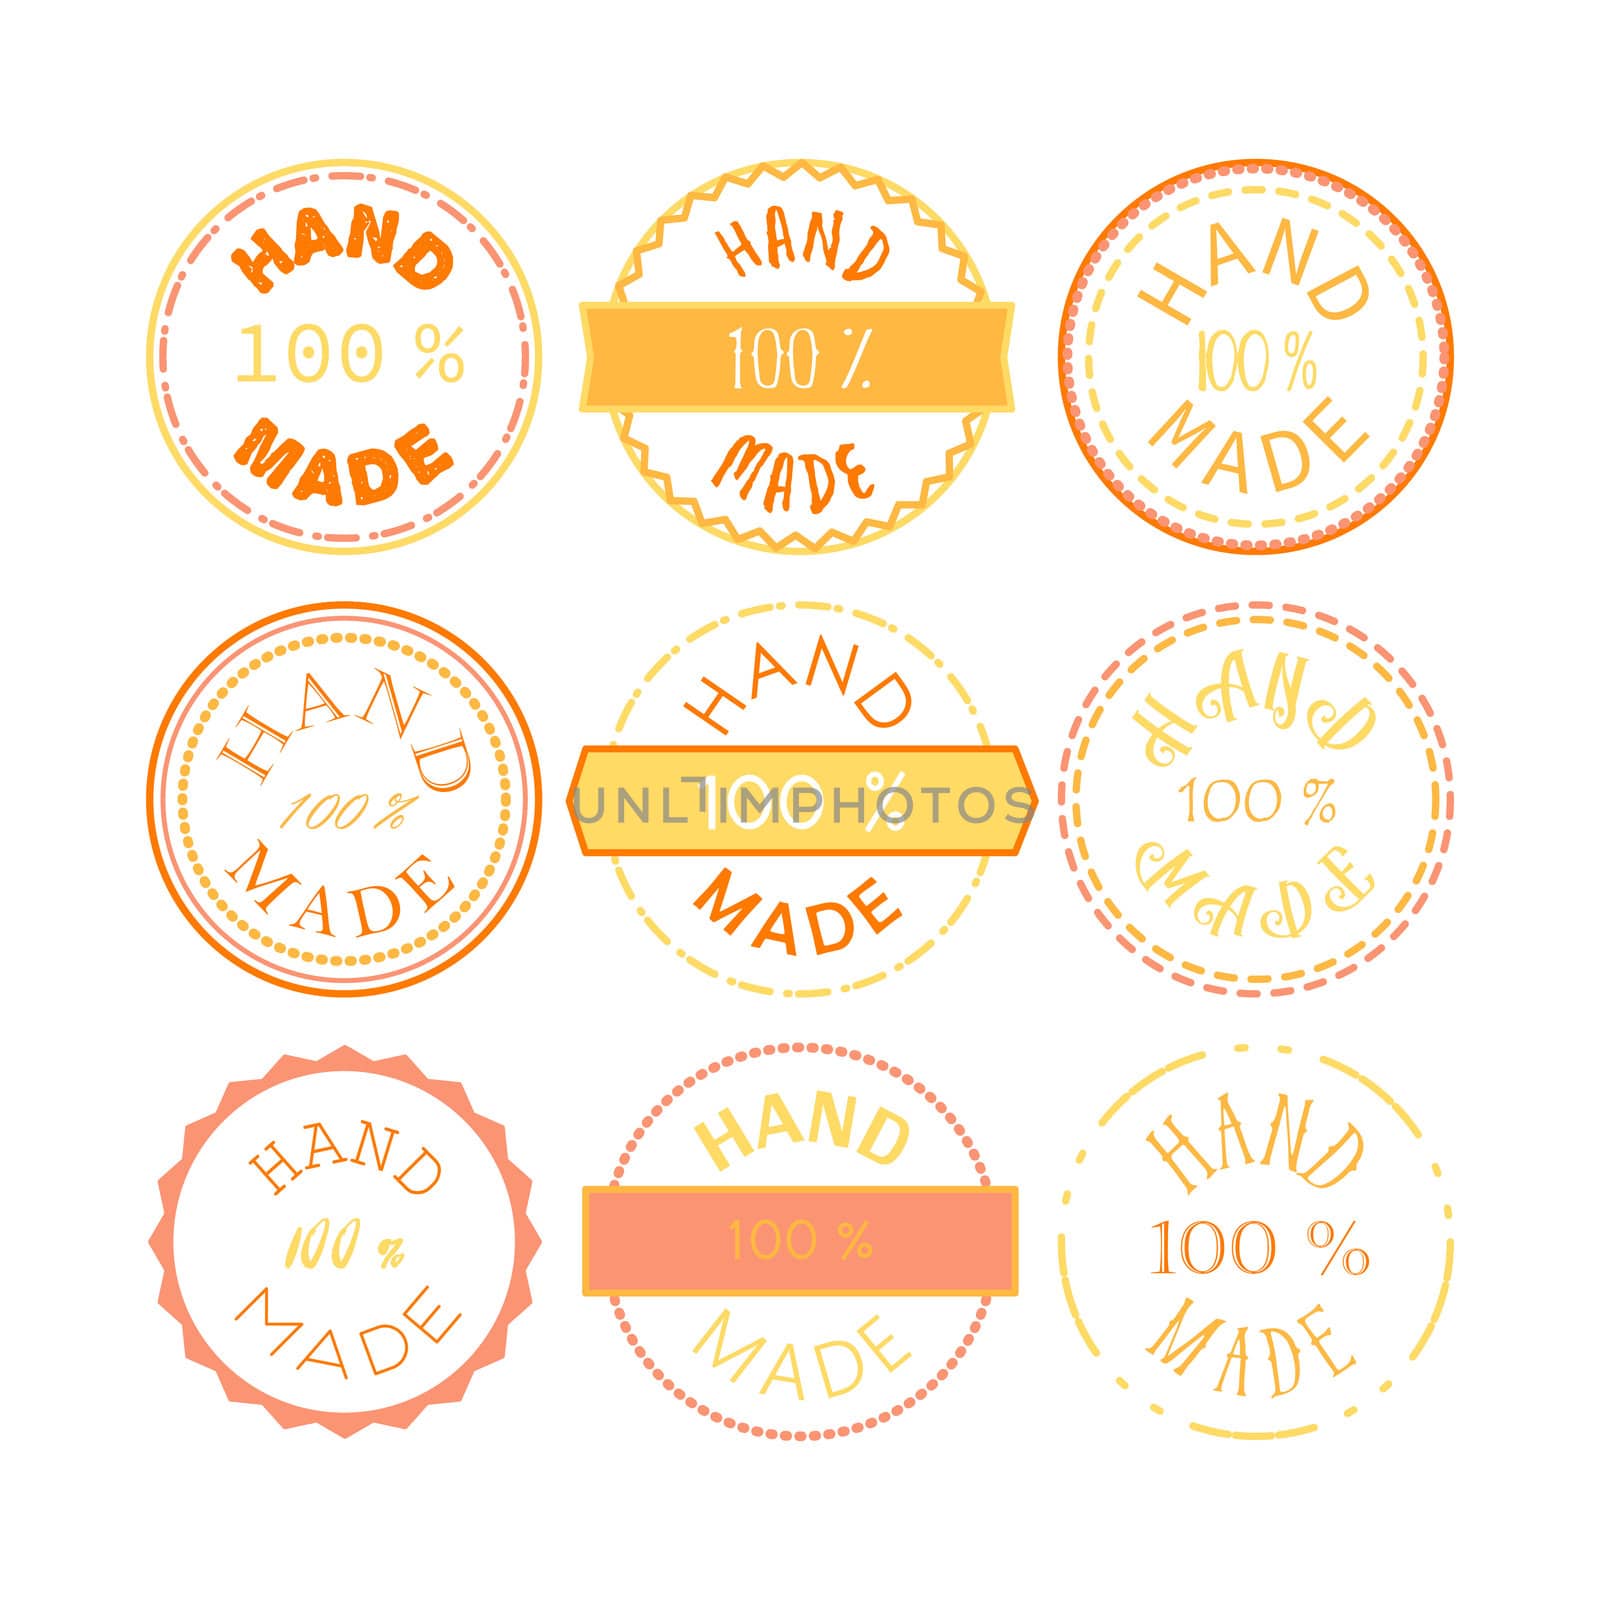 Badge template with 100 handmade product symbol. Vintage sticker with text 100 hand made. 100 Percents Hand Made Design Element, Label, Insignia, Tag, Emblem. Vector